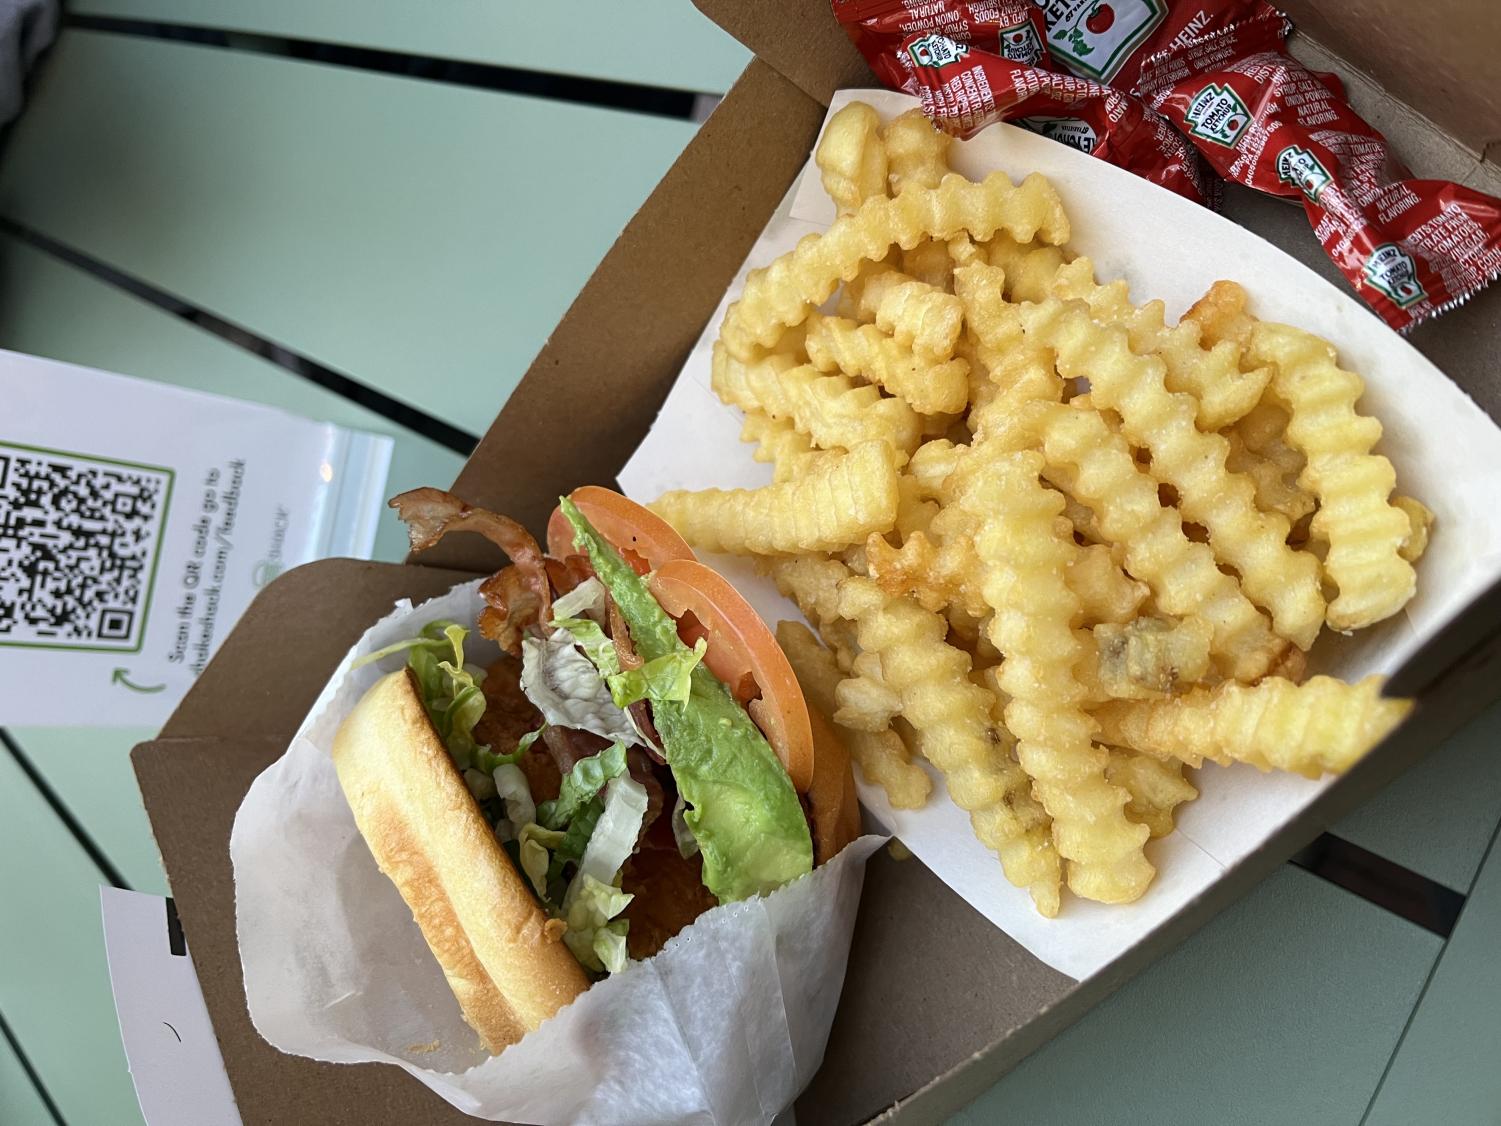 Photo of the chicken sandwich and a side of fries from Shake Shack